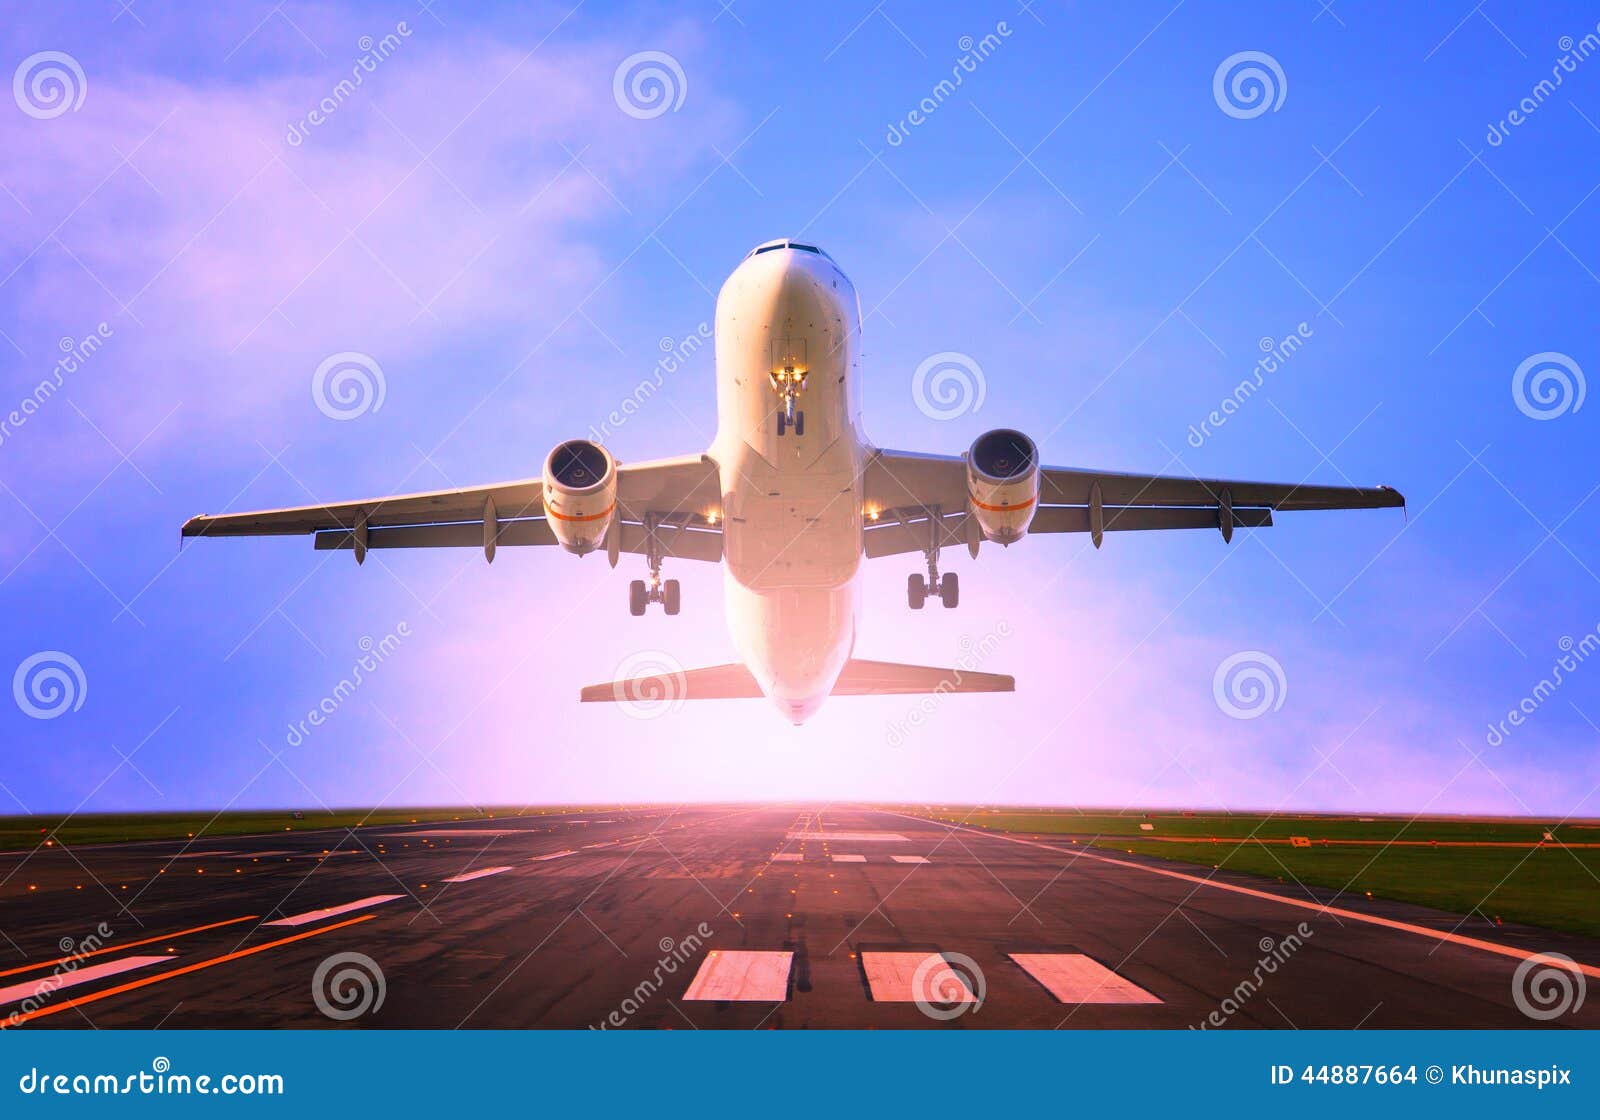 passenger jet plane flying from airport runway use for traveling and cargo , freight industry topic